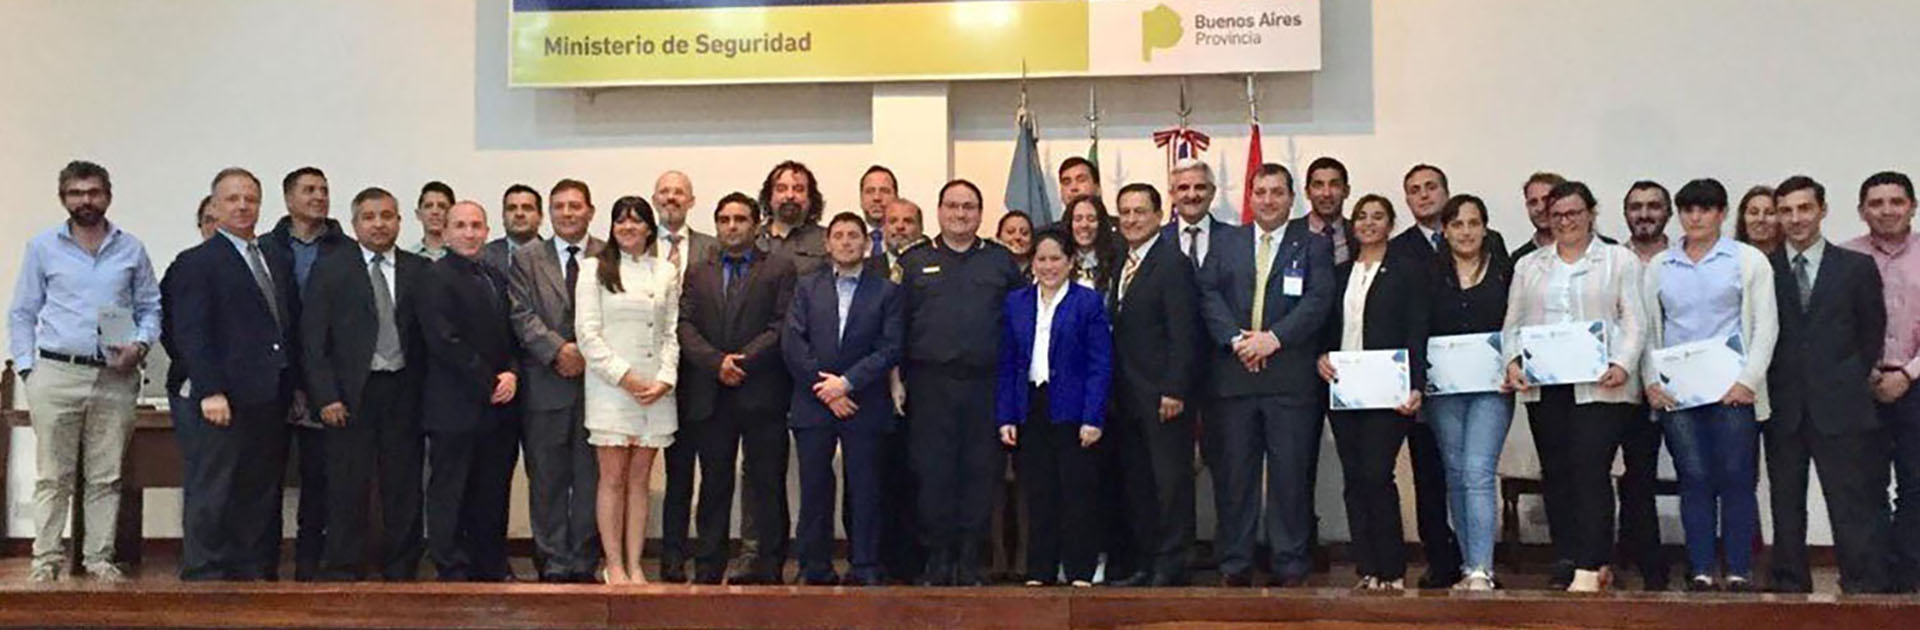 Buenos Aires Provincial Ministry of Public Security - Group Photo